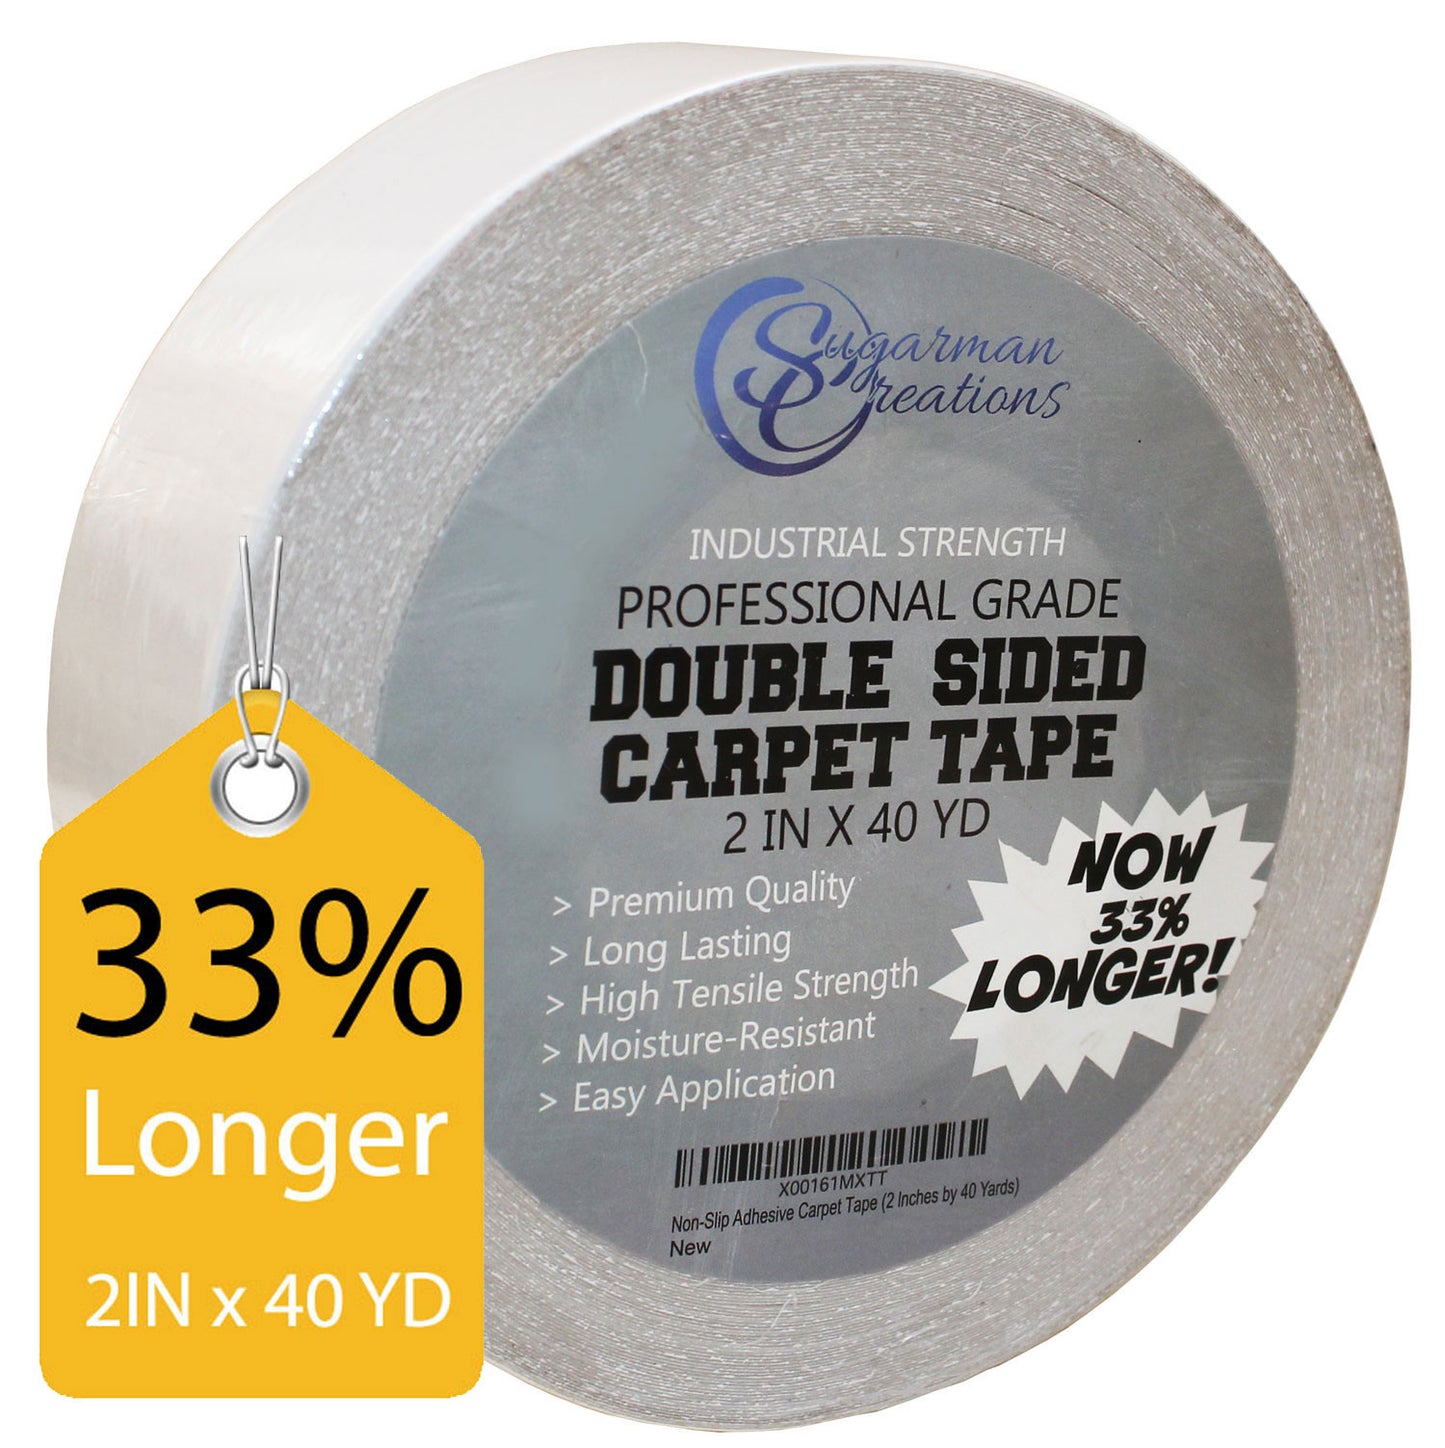 Carpet Tape Double Sided 2 IN X 40